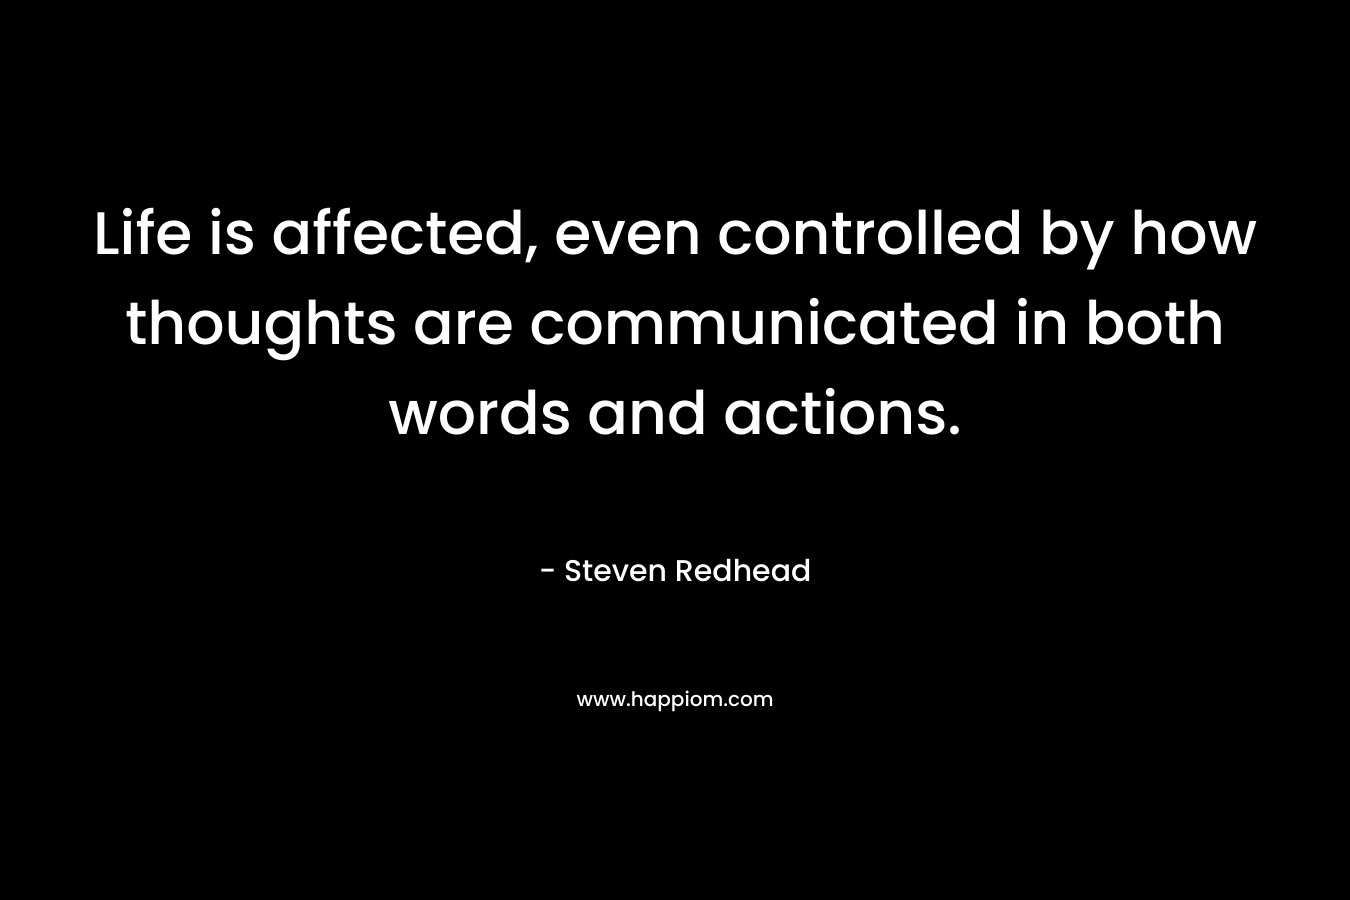 Life is affected, even controlled by how thoughts are communicated in both words and actions.